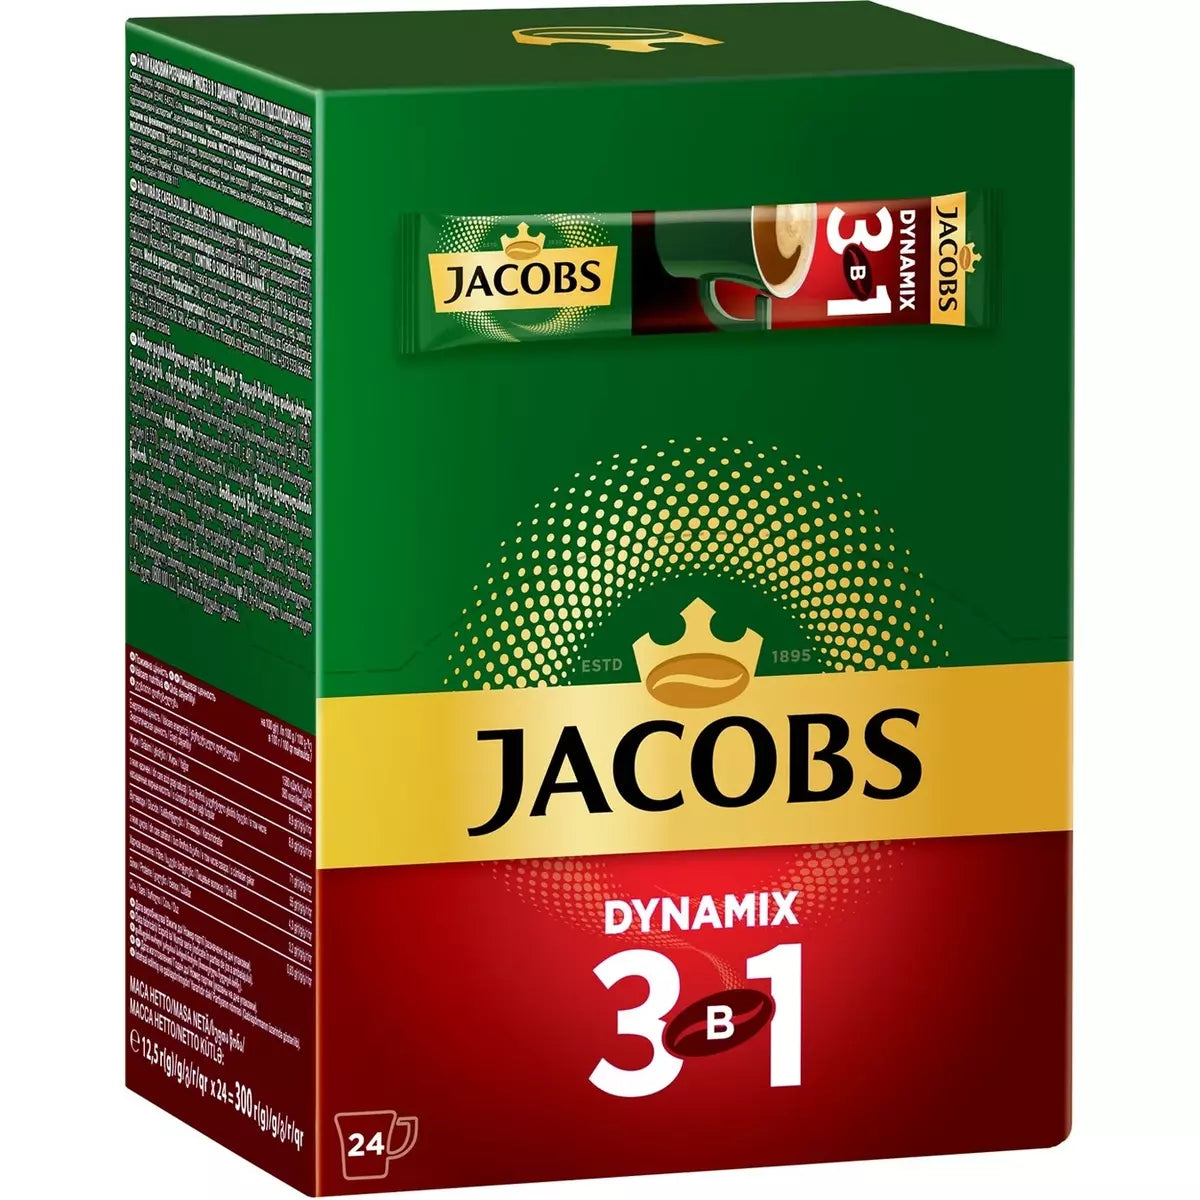 Jacobs 3 in 1 Instant Dynamix, 24 Packets